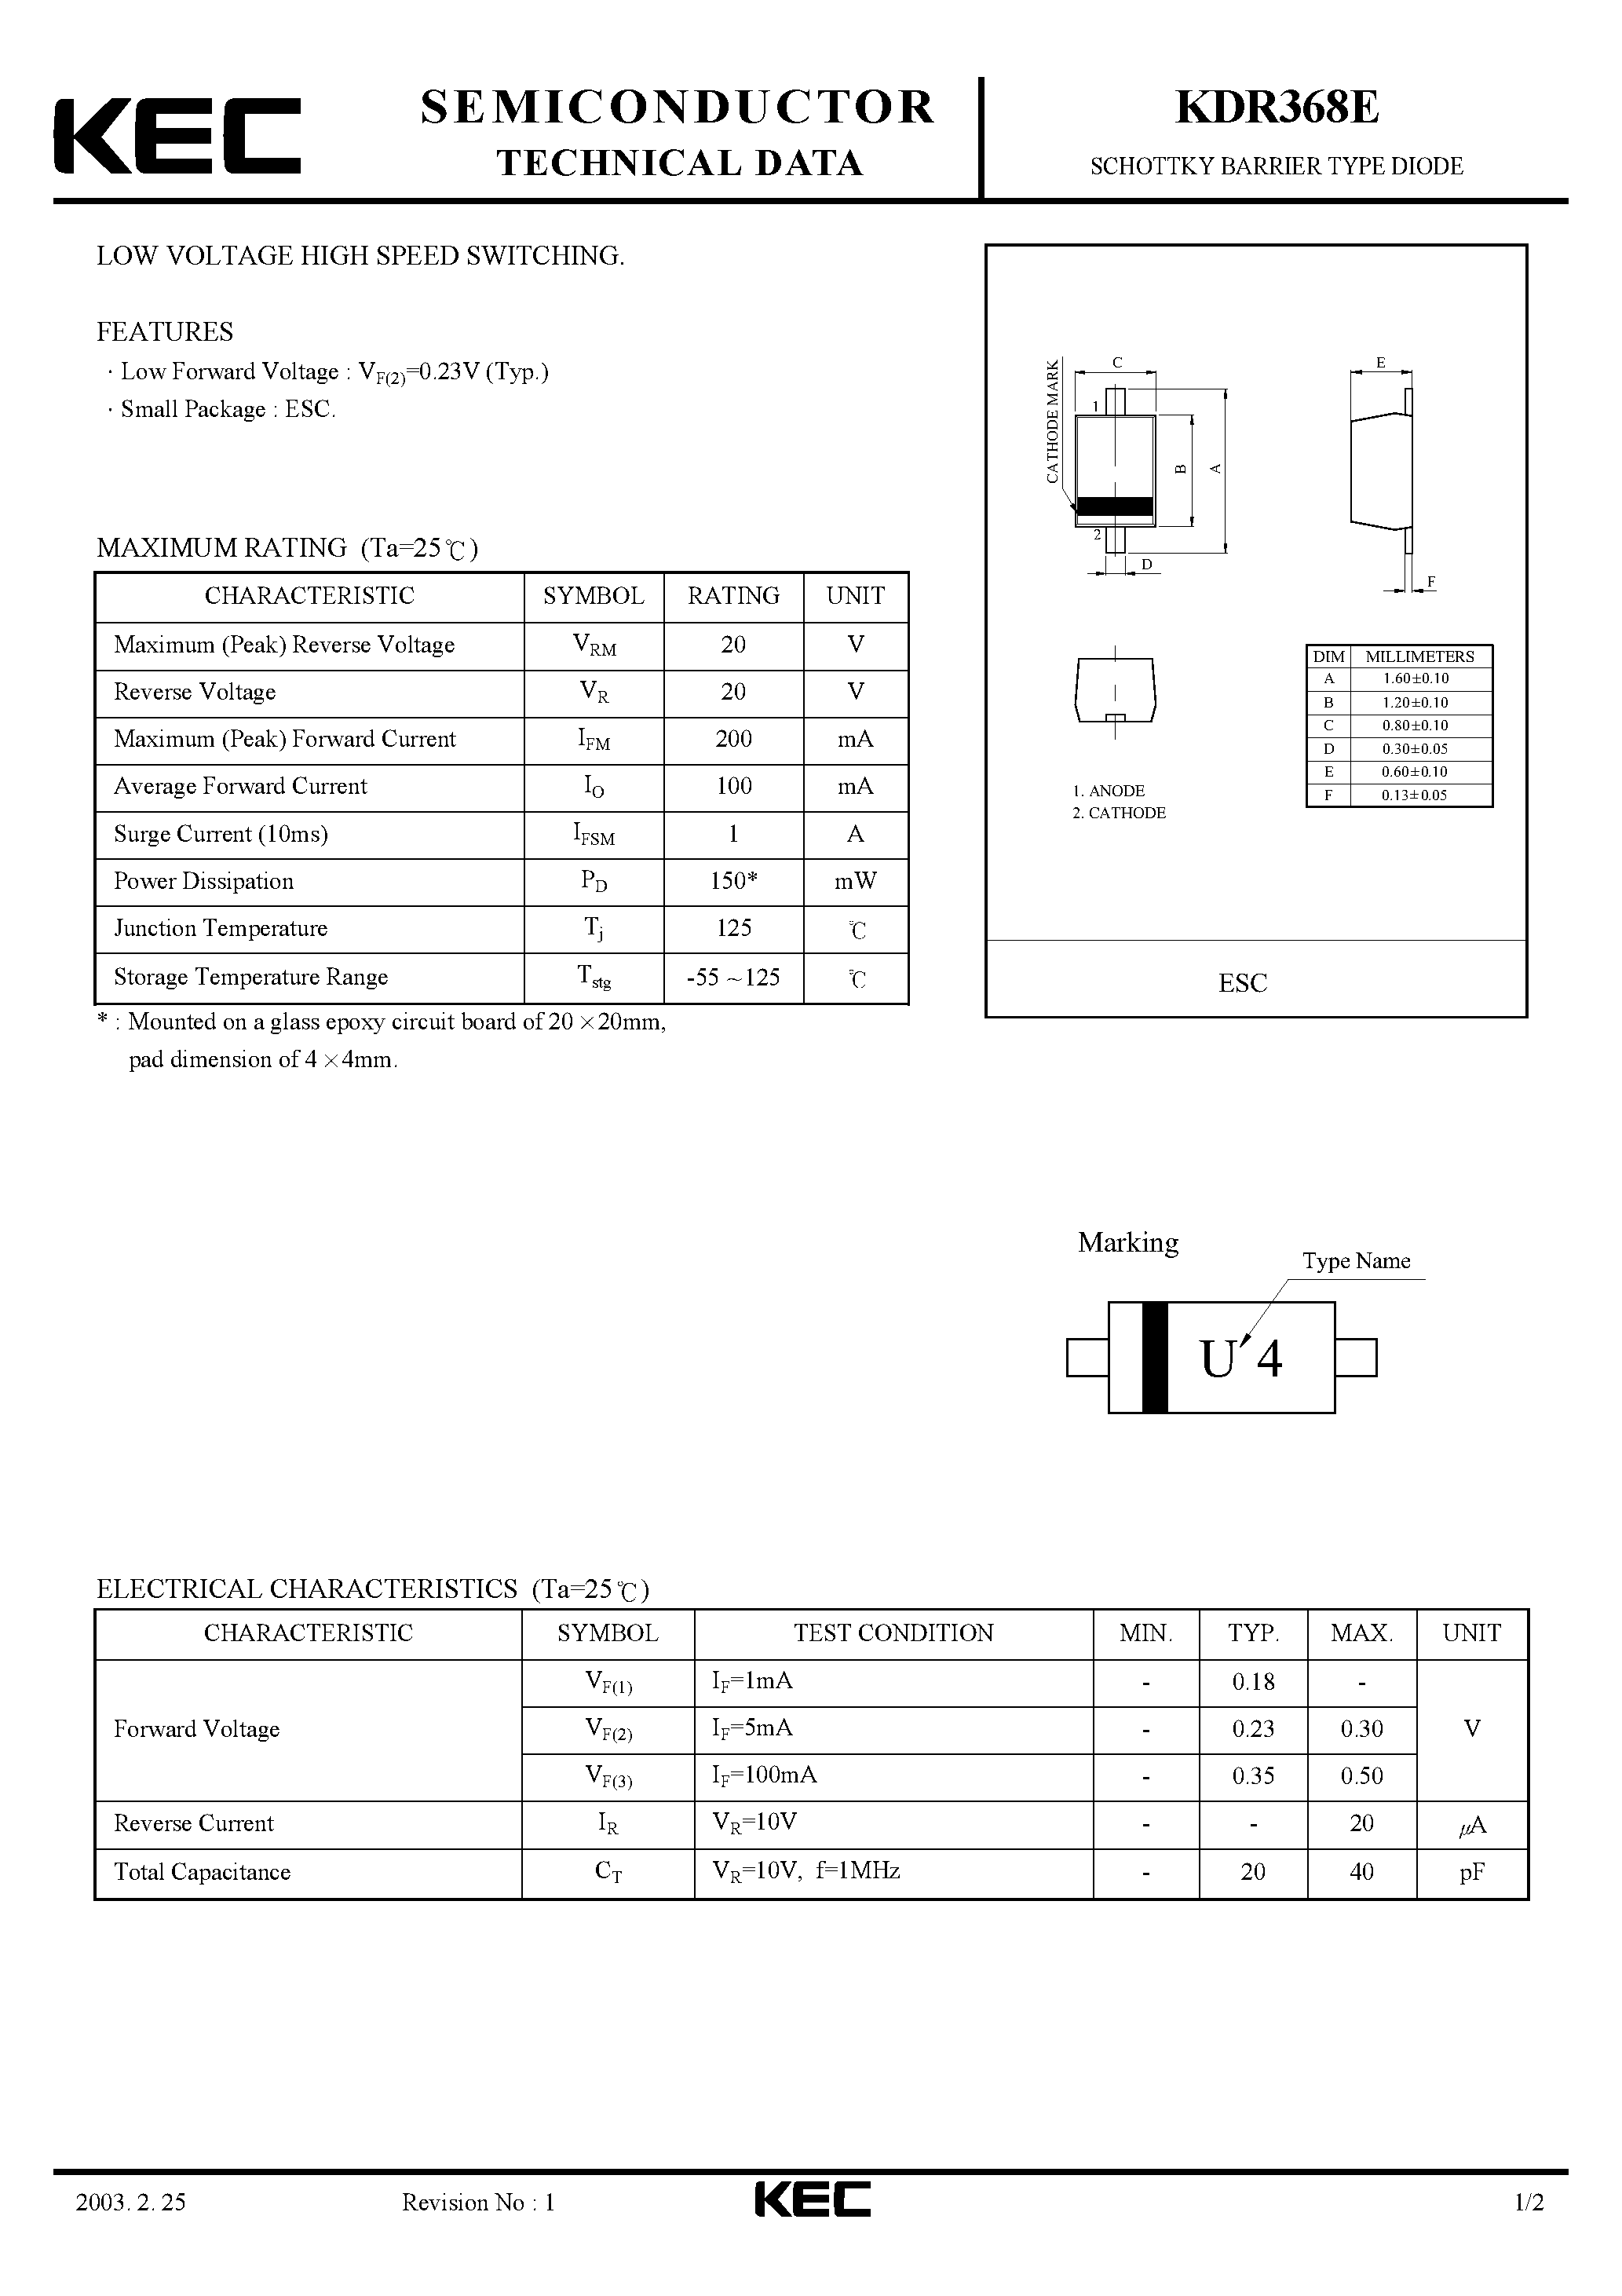 Datasheet KDR368E - SCHOTTKY BARRIER TYPE DIODE(LOW VOLTAGE HIGH SPEED SWITCHING) page 1